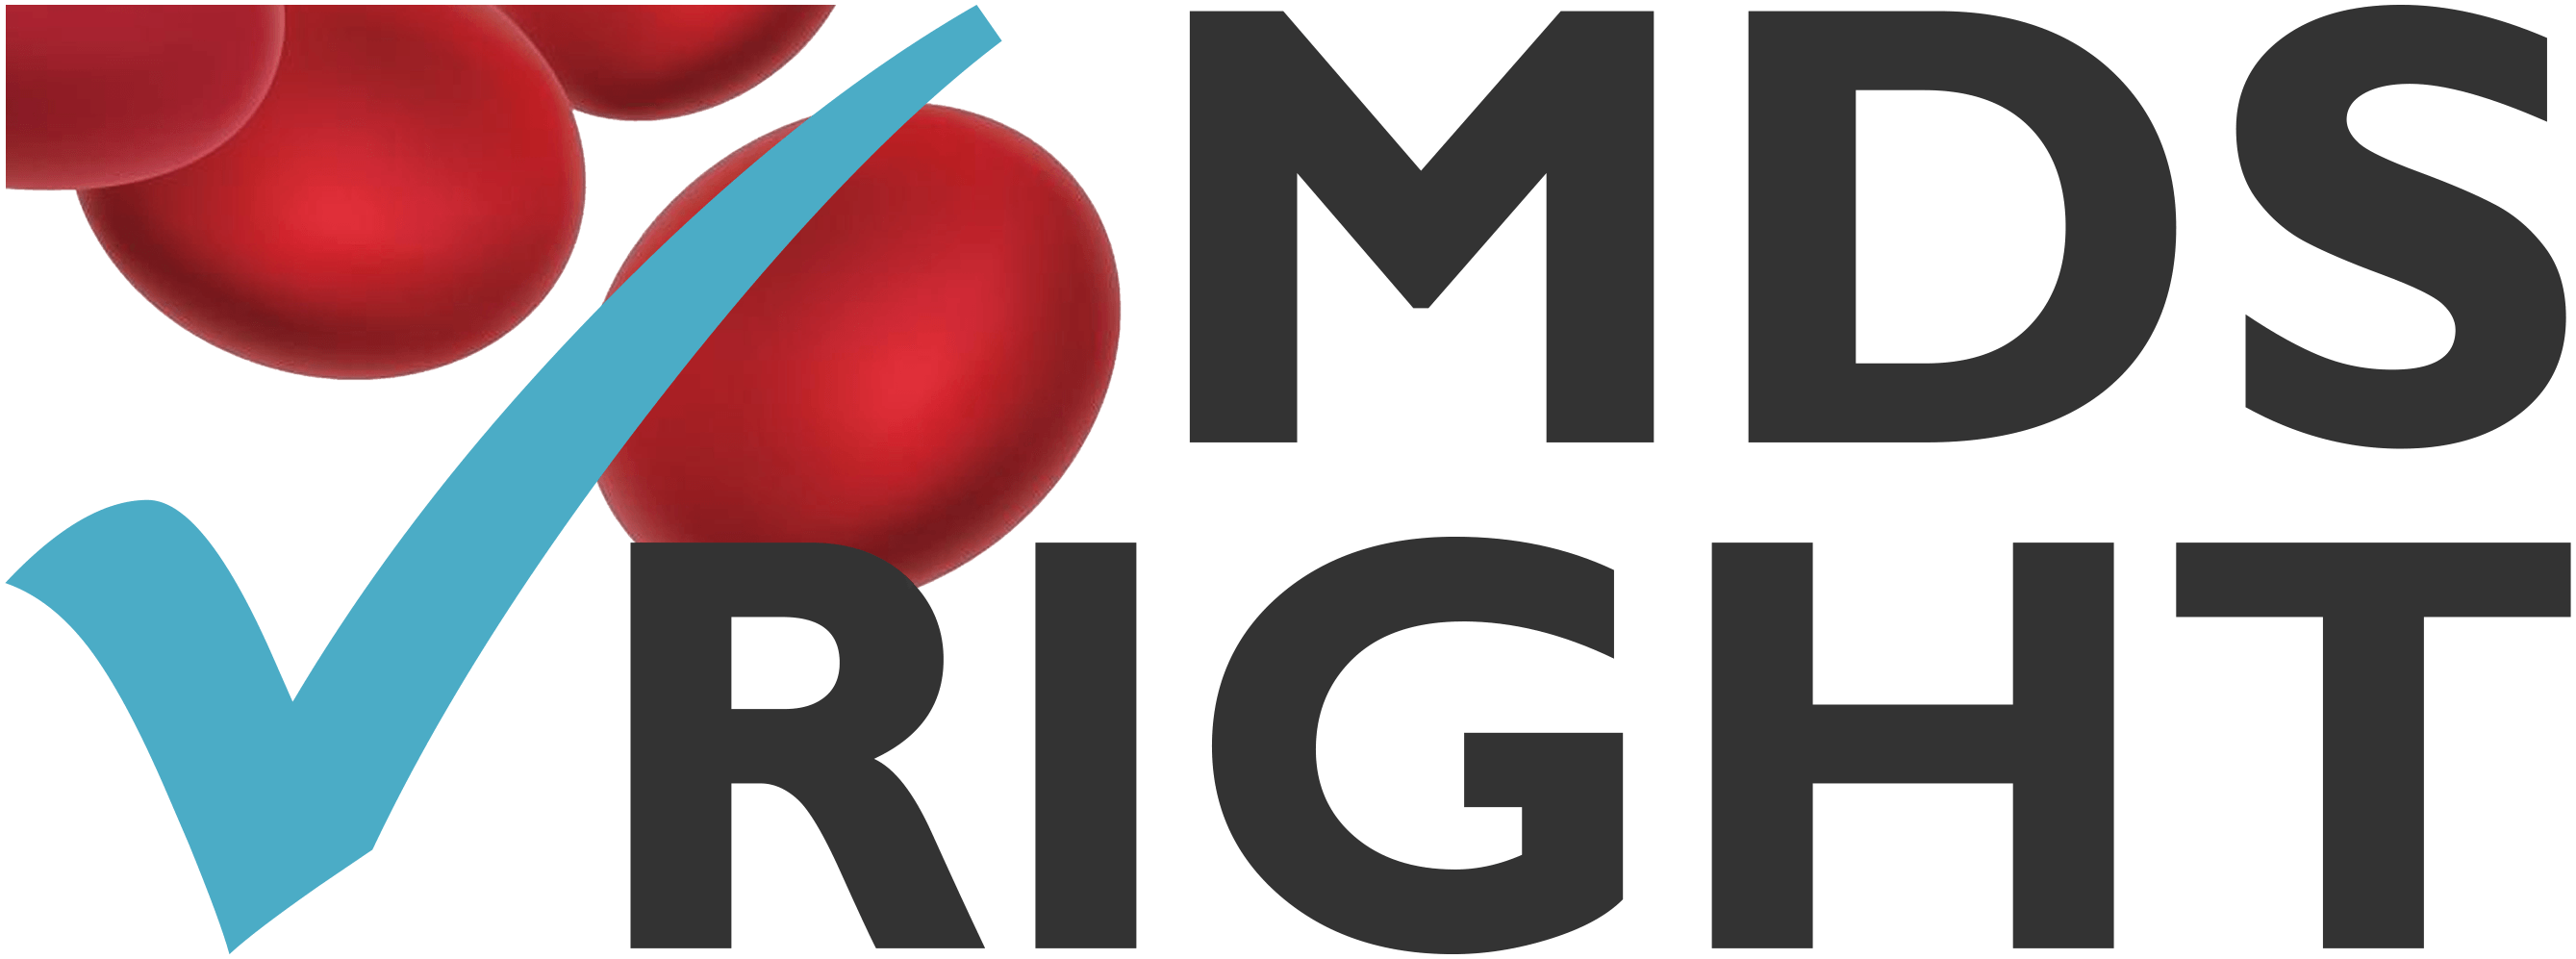 Right Logo - Mds Right Logo Large UK Patient Support Group